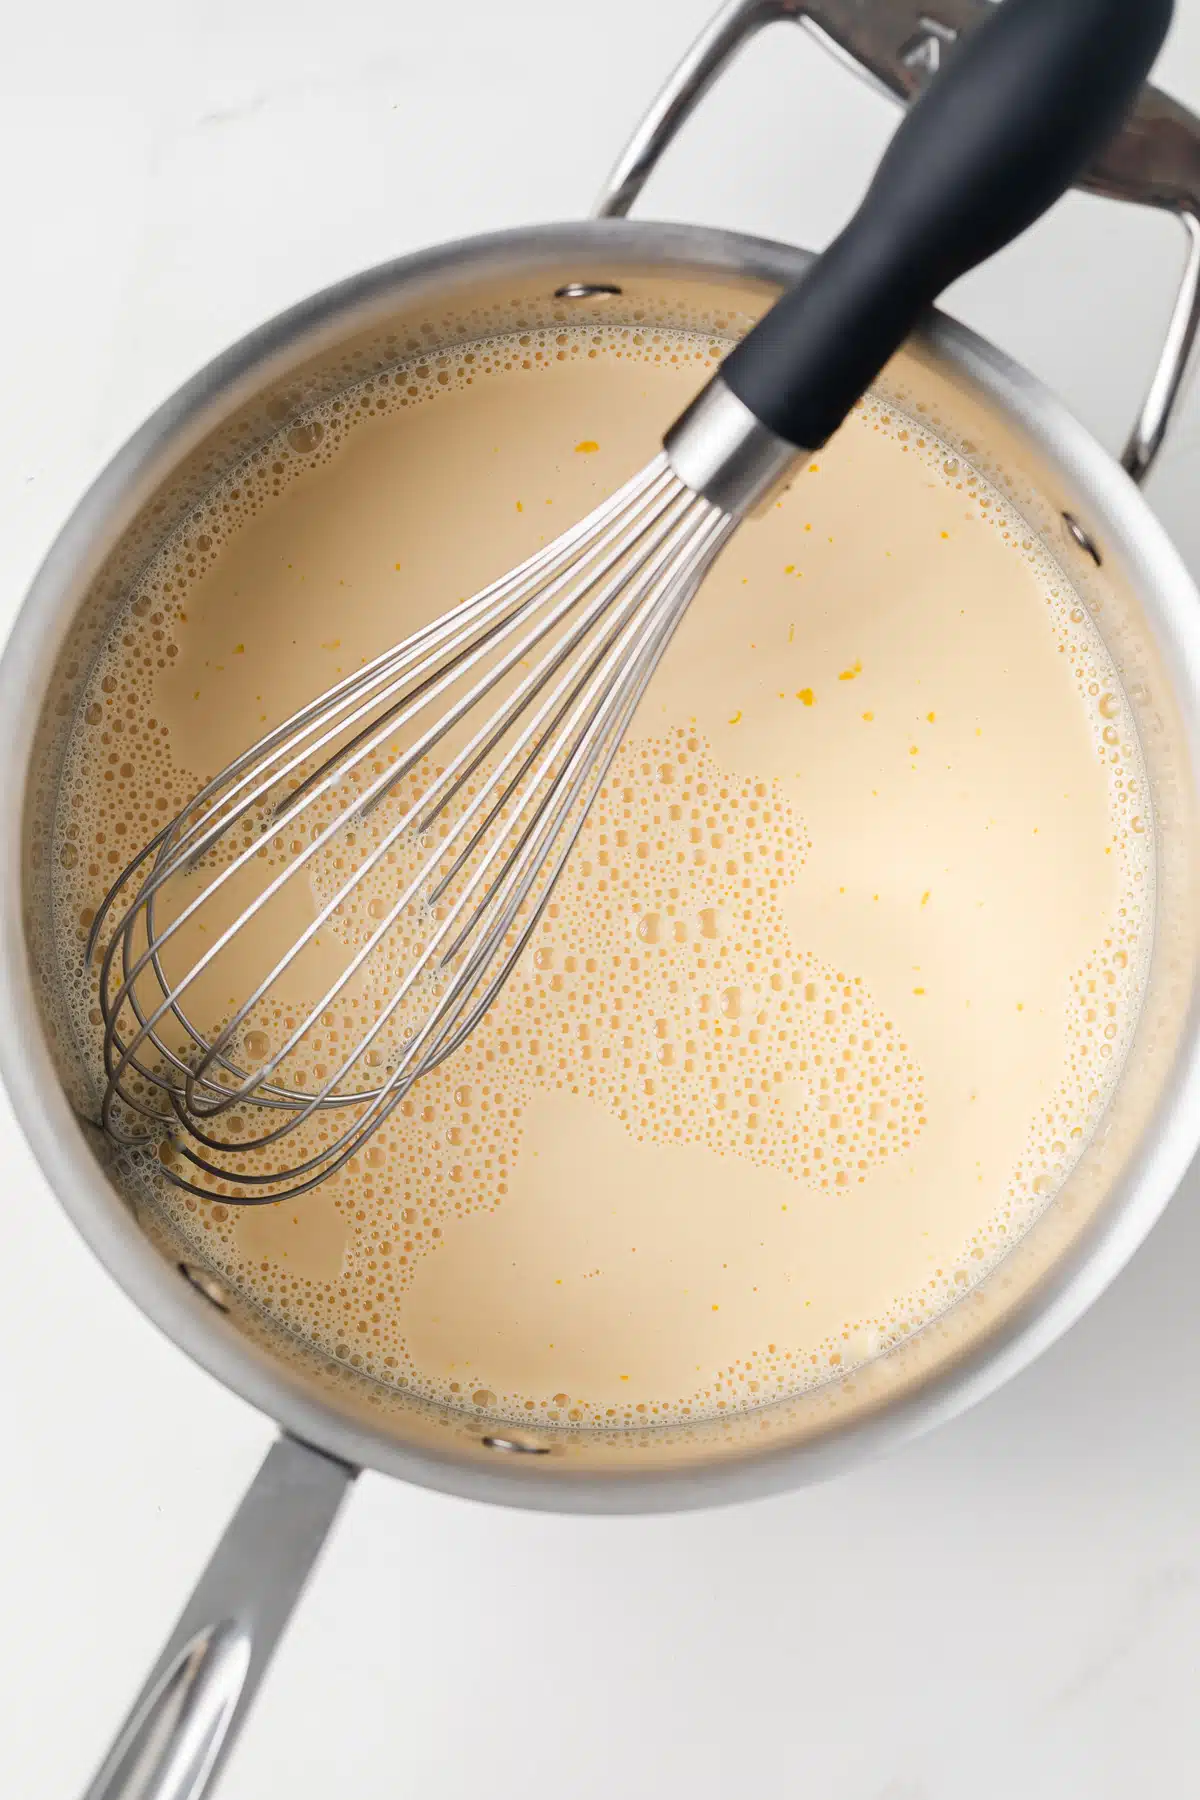 Egg yolks and evaporated milk whisked in sauce pan.